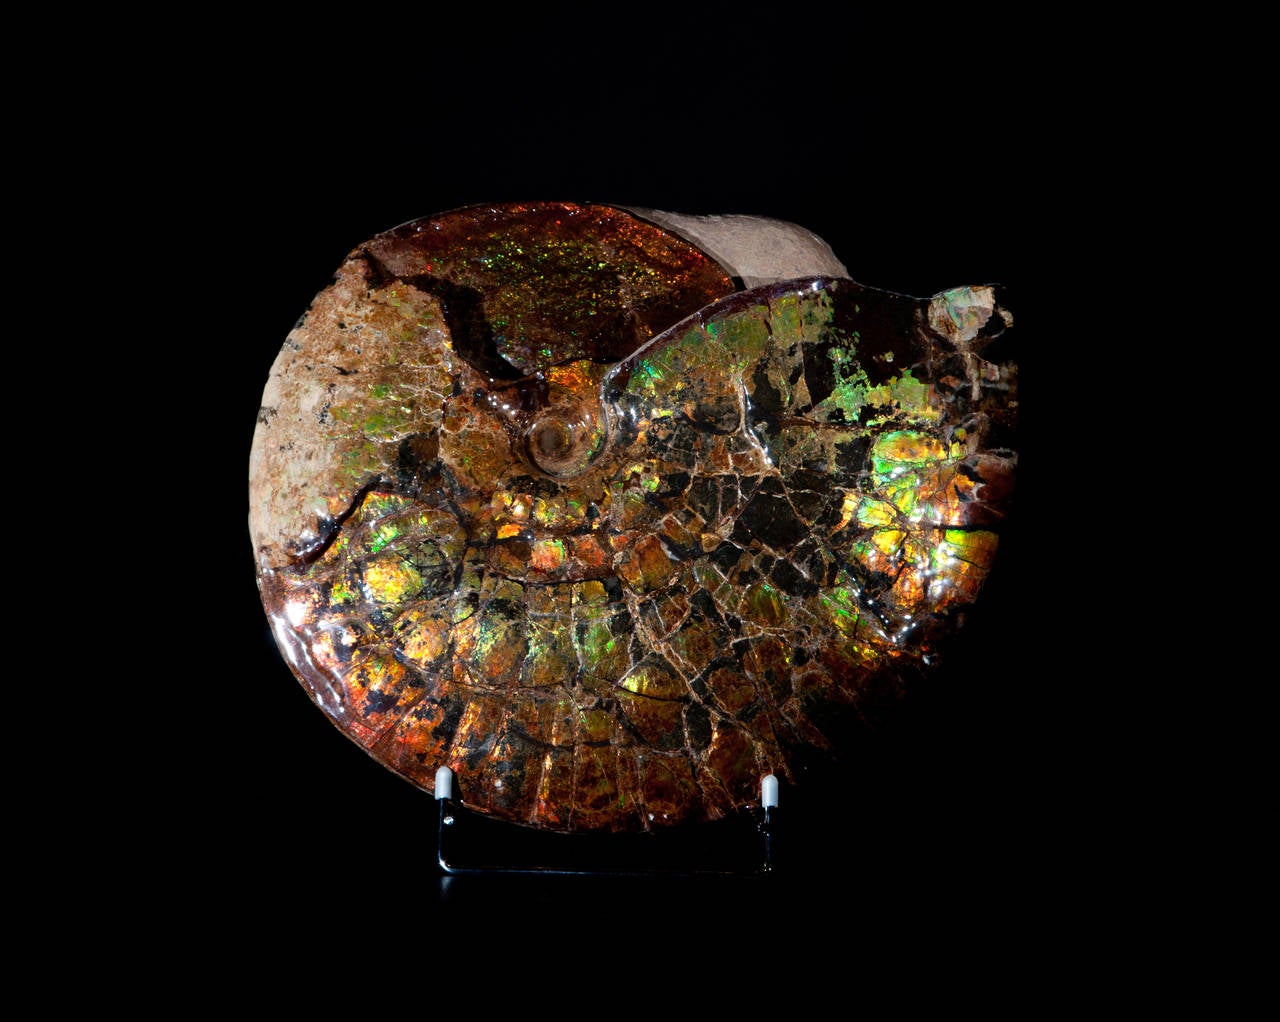 This mesmerising iridescent Ammonite from Alberta, Canada, is a particularly rare example of an ancient sea creature that went extinct at the same time as most dinosaurs. The vivid coloration is the result of millions of years of pressures and high